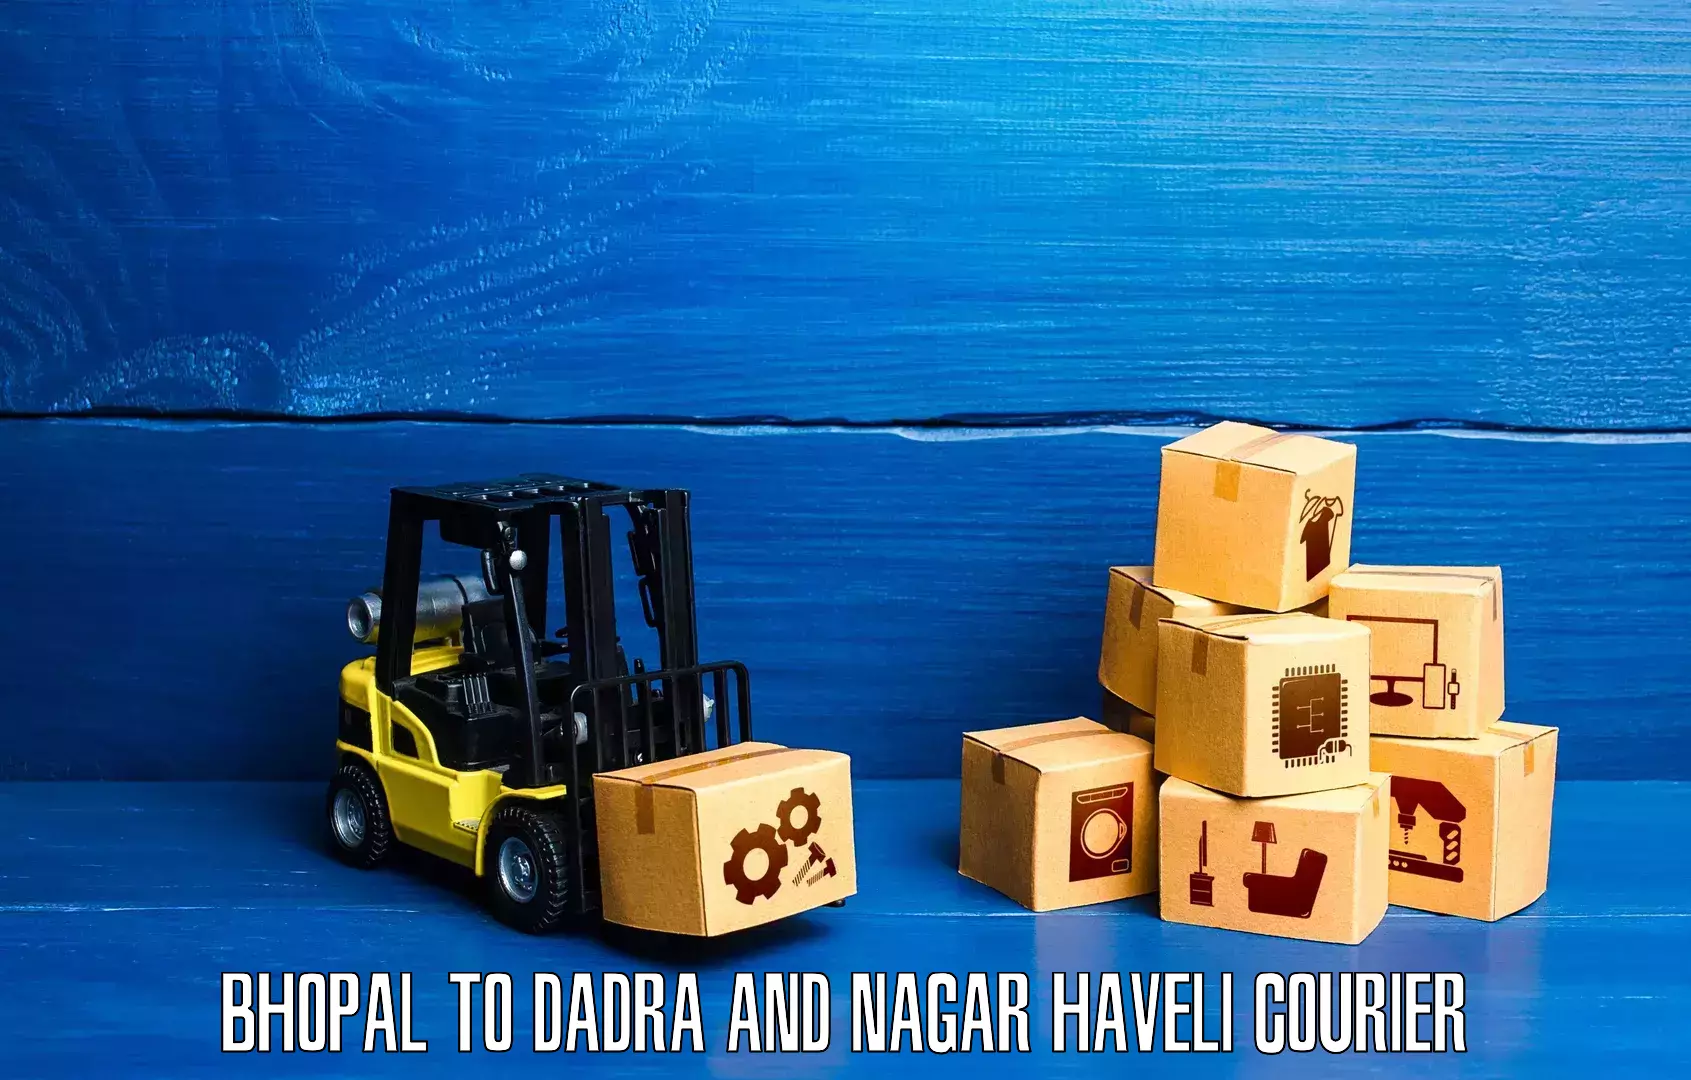 Global courier networks Bhopal to Dadra and Nagar Haveli